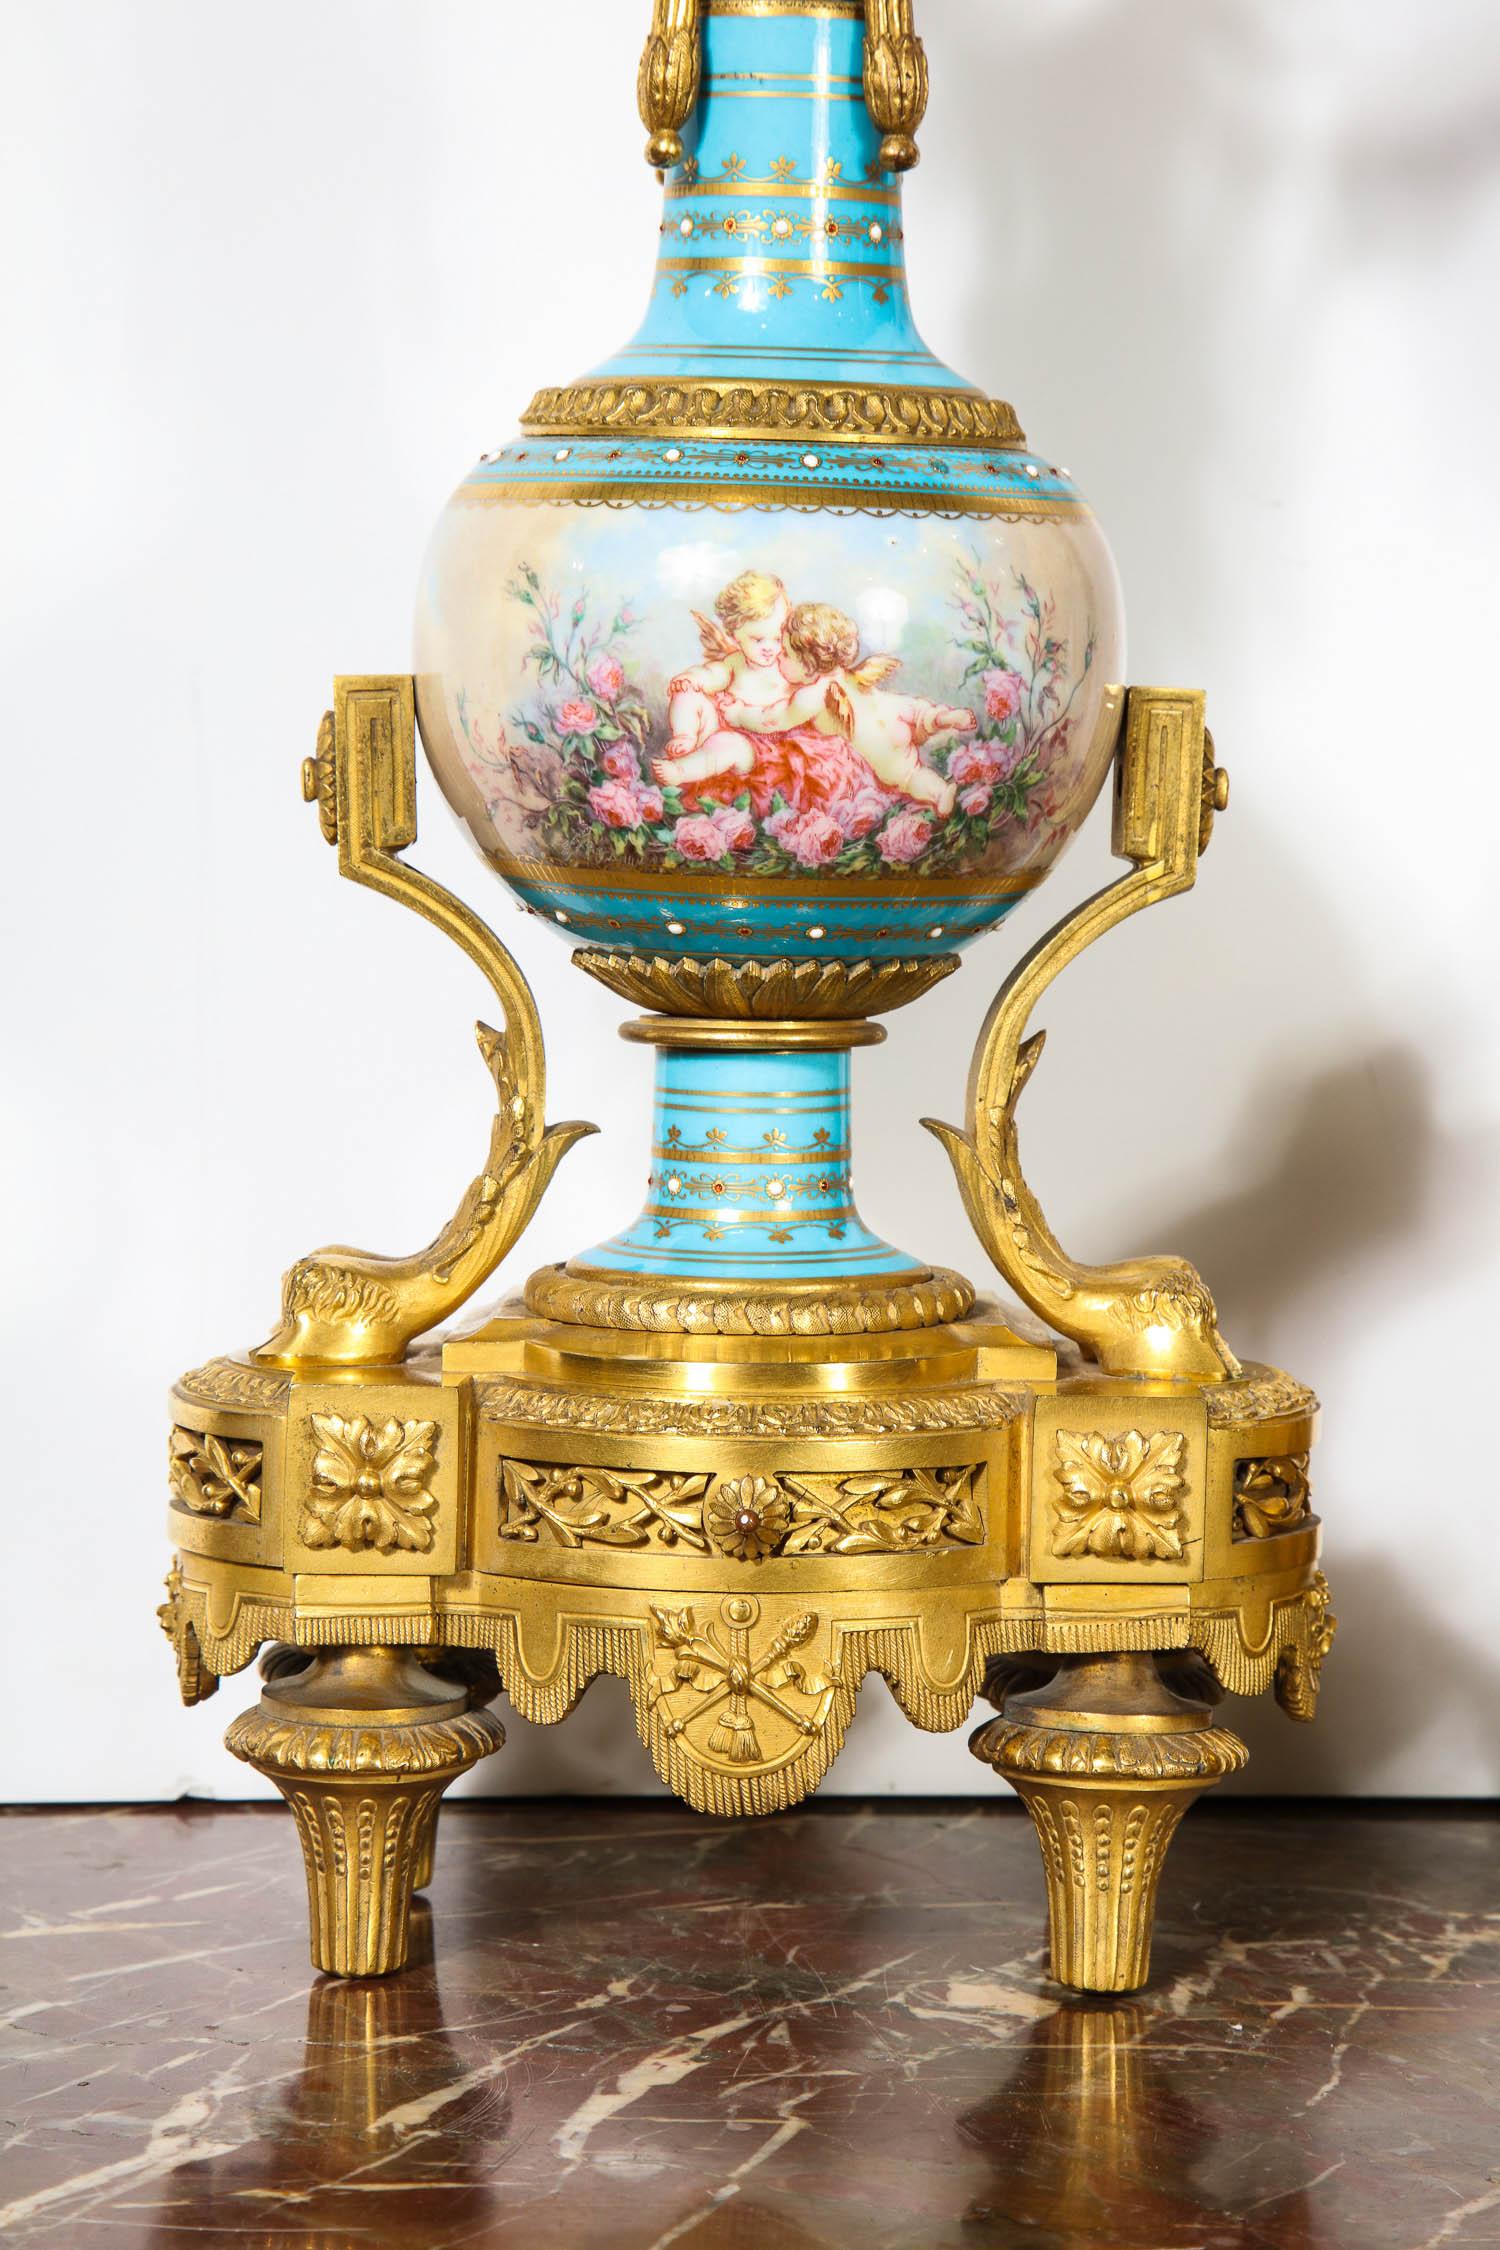 Bronze Exceptional French Ormolu-Mounted Turquoise Jeweled Sevres Porcelain Clock Set